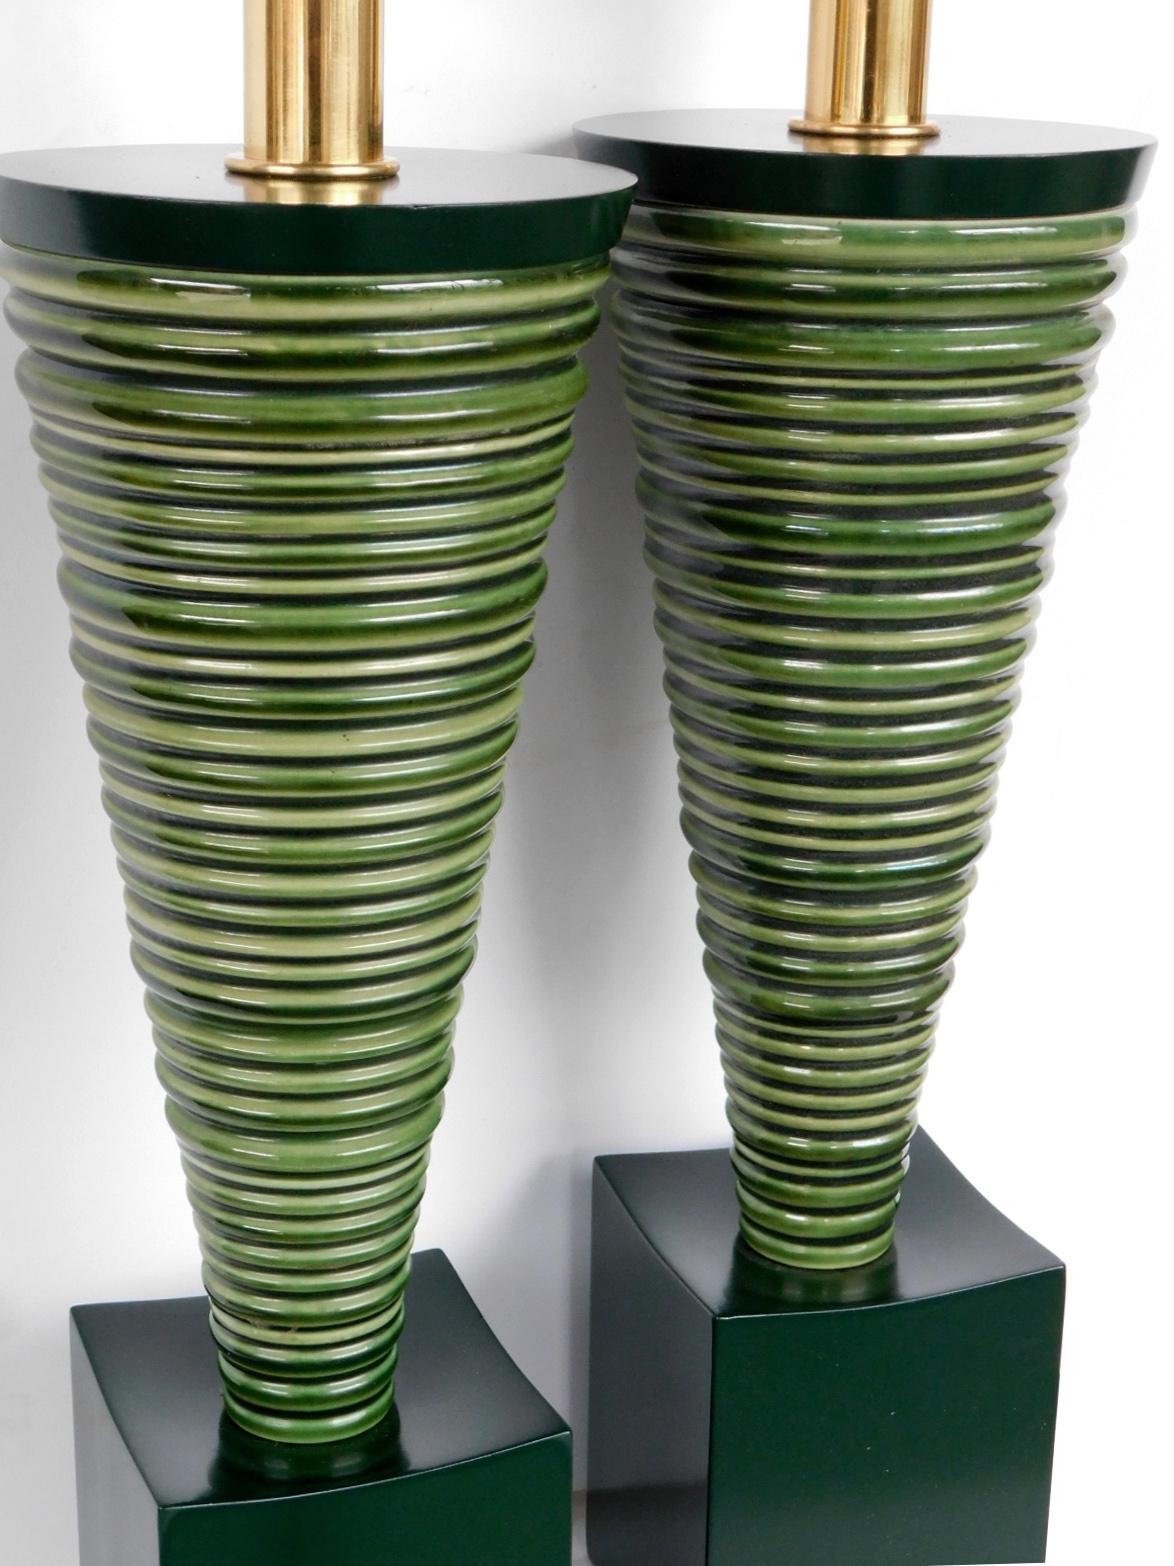 Great midcentury design, each ribbed conical-shaped ceramic lamp resting on a concave forest-green lacquered wooden plinth; Measures: 17